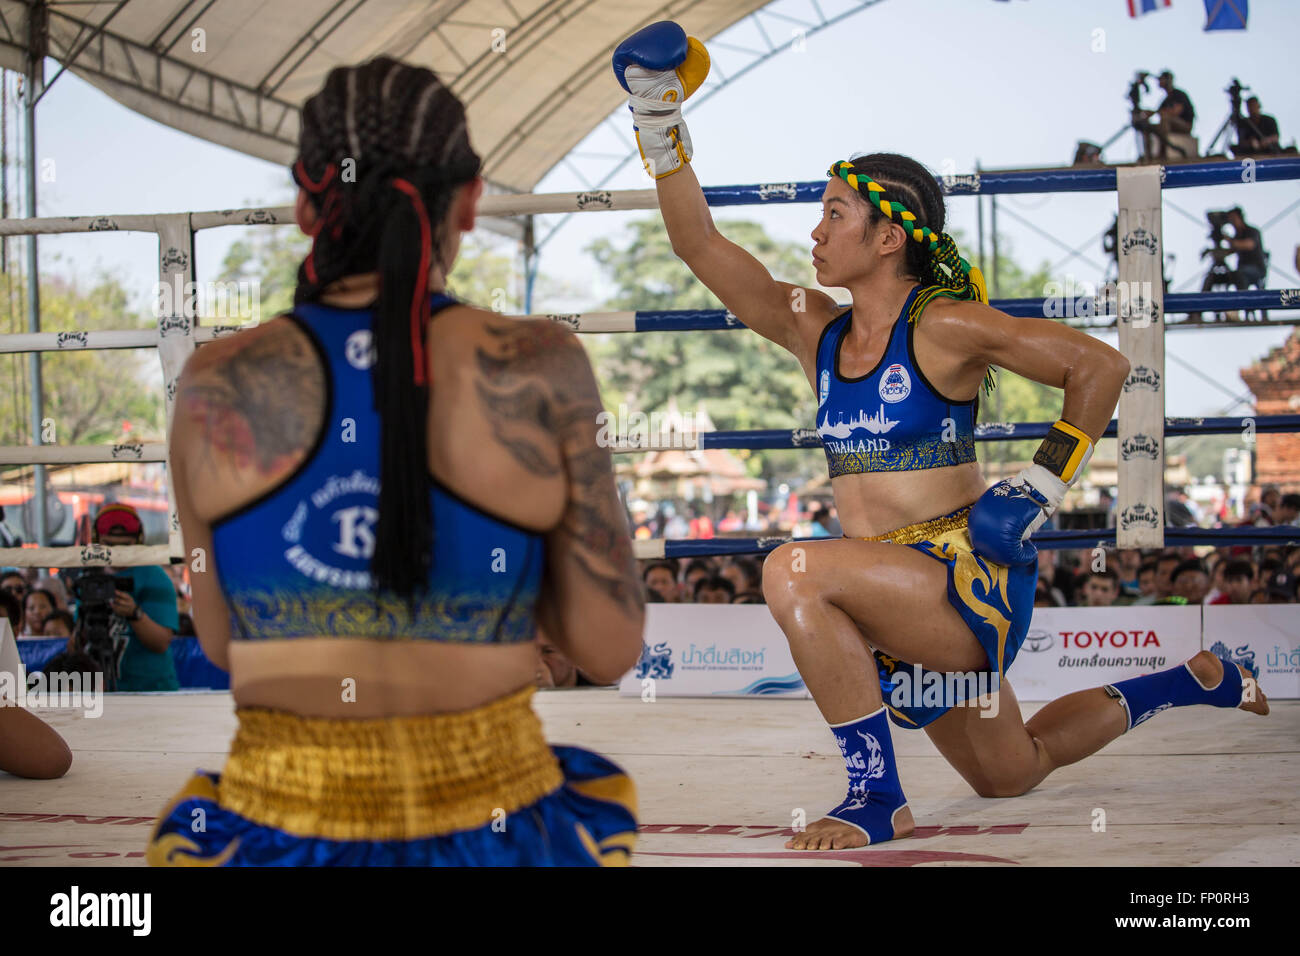 Ayutthaya, Thailand. 17th Mar, 2016. This picture shows women performing a ritual dance before the fight during the 12th World Wai Kru Muay Thai Ceremony.The 12th World Wai Kru Muay Thai Ceremony is being held near the famous Wat Maha That Temple in Ayutthaya Historical Park and attract every year more than 1200 Muay Thai fighters from 57 countries to showcase some of the sacred martial art rituals of Muay Thai Boxing. Credit:  Guillaume Payen/ZUMA Wire/Alamy Live News Stock Photo